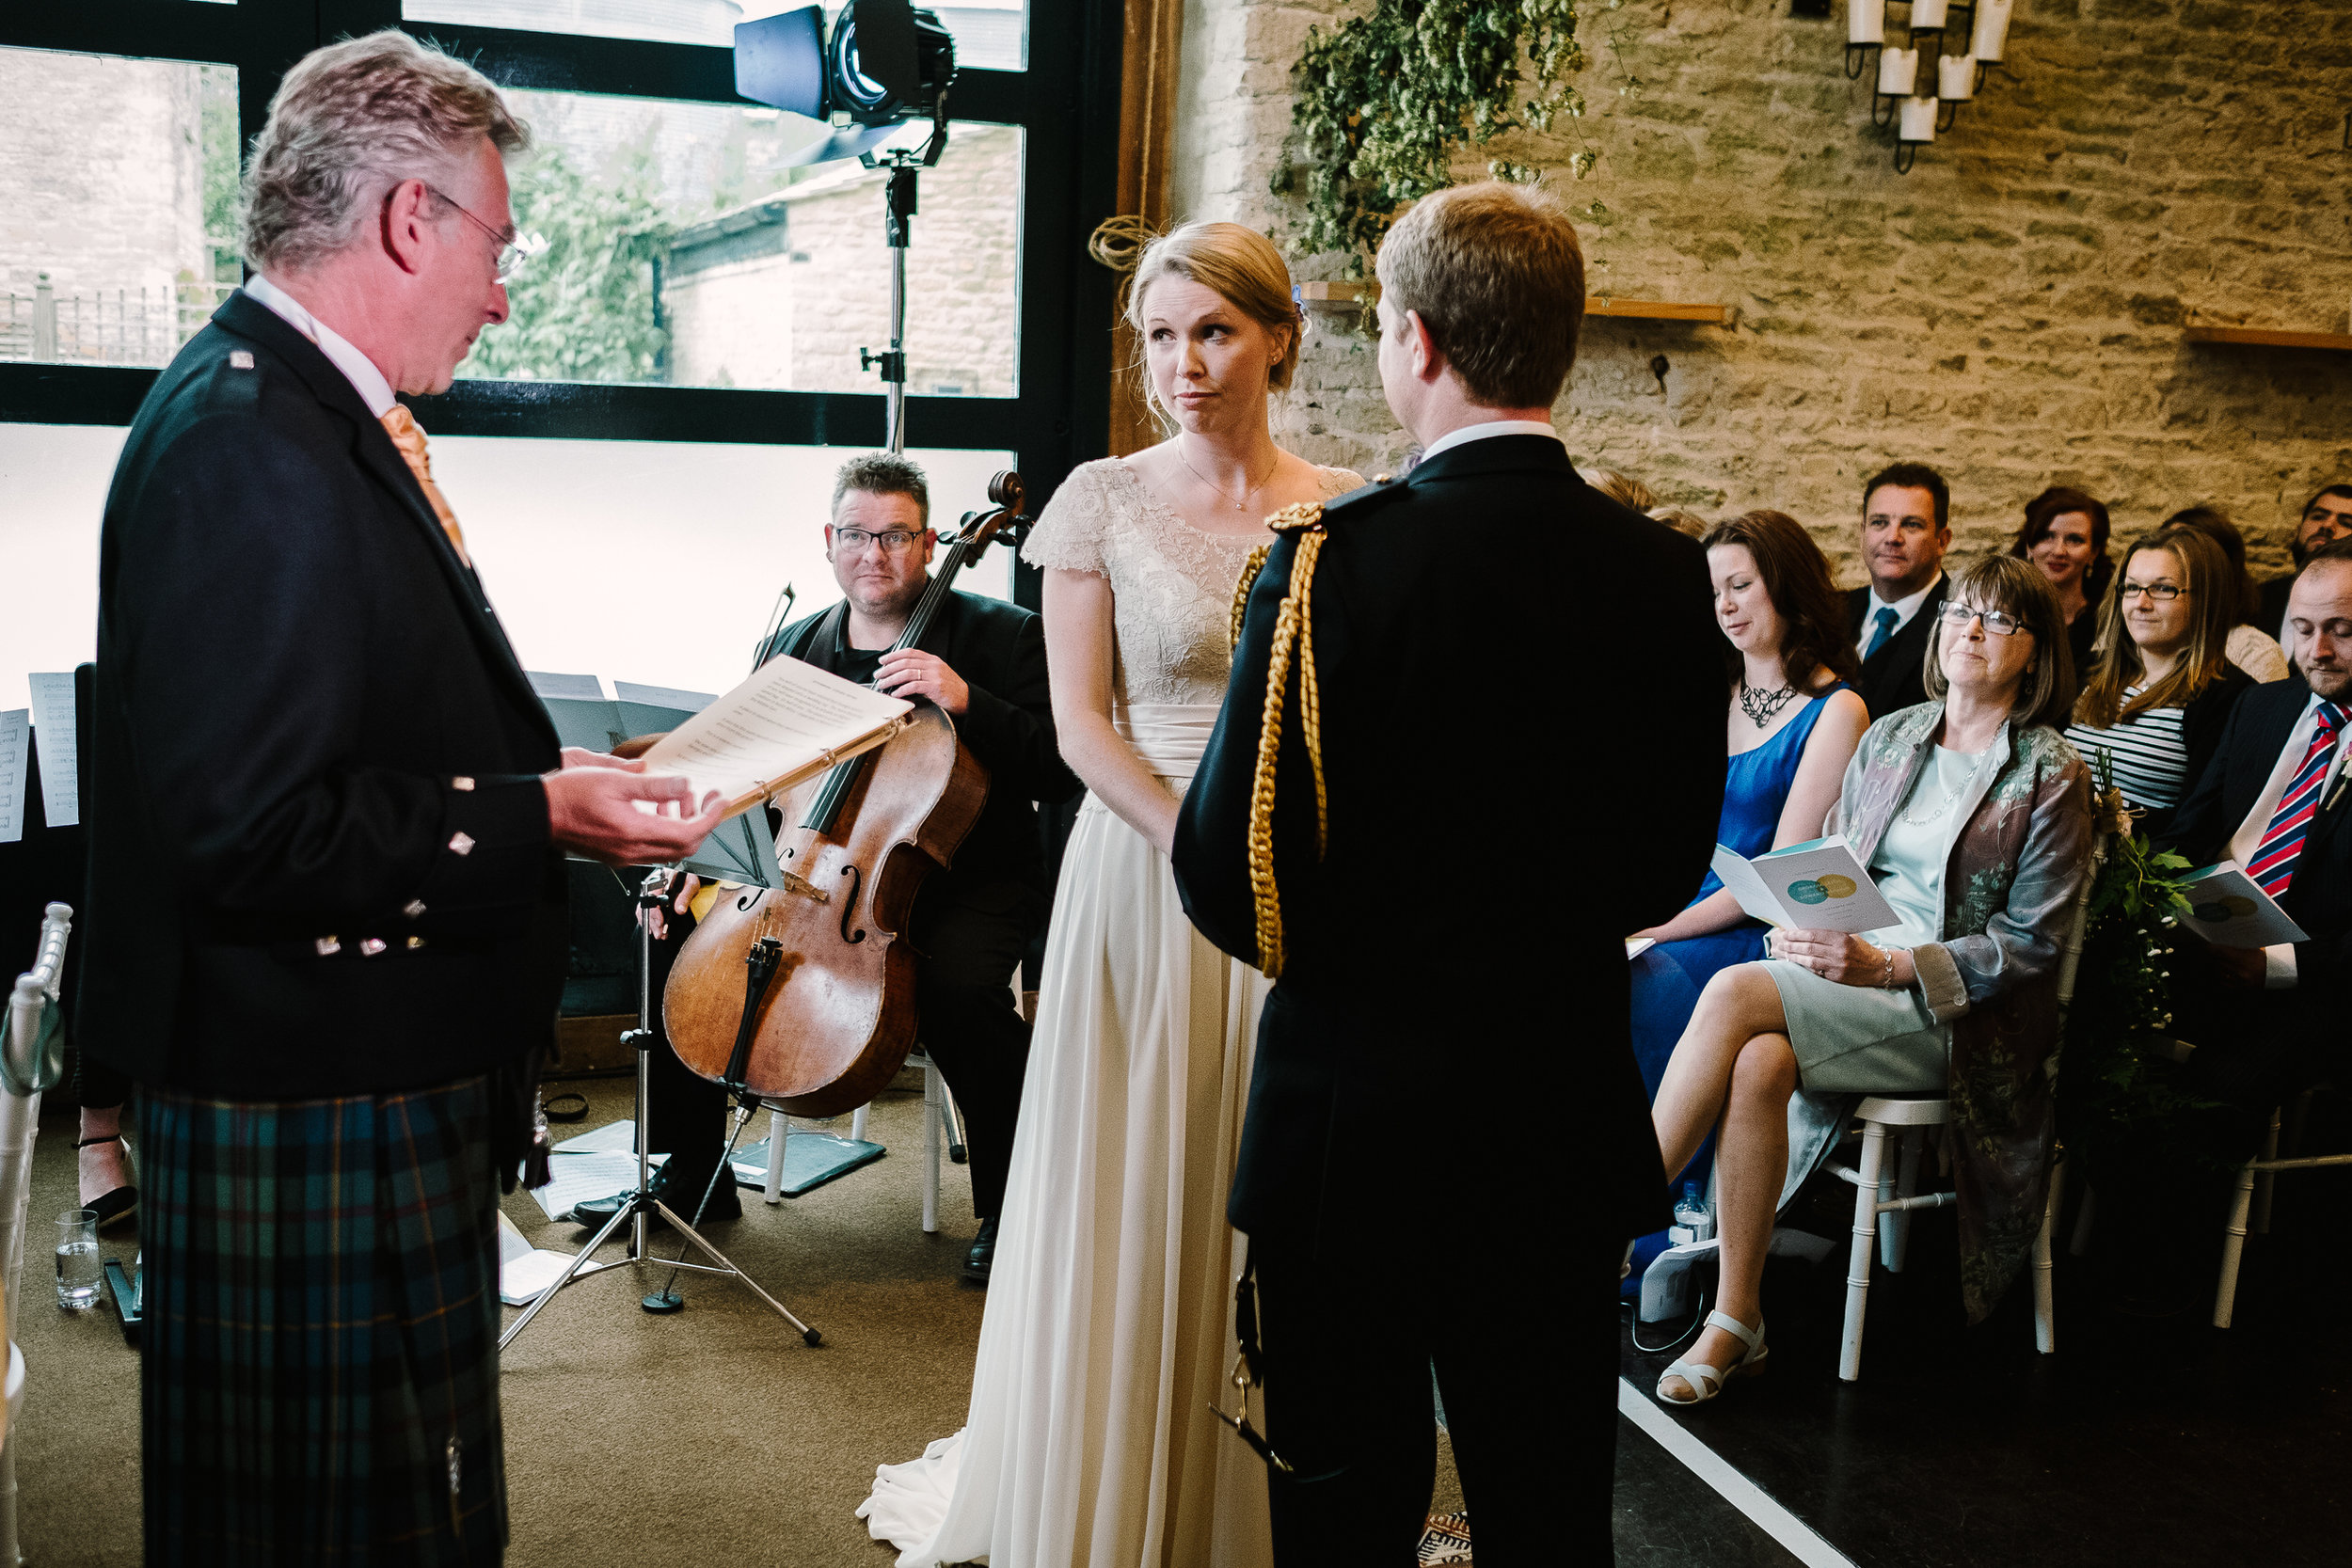 A celebrant leads the ceremony at a wedding at Merriscourt Wedding Venue, Oxfordshire